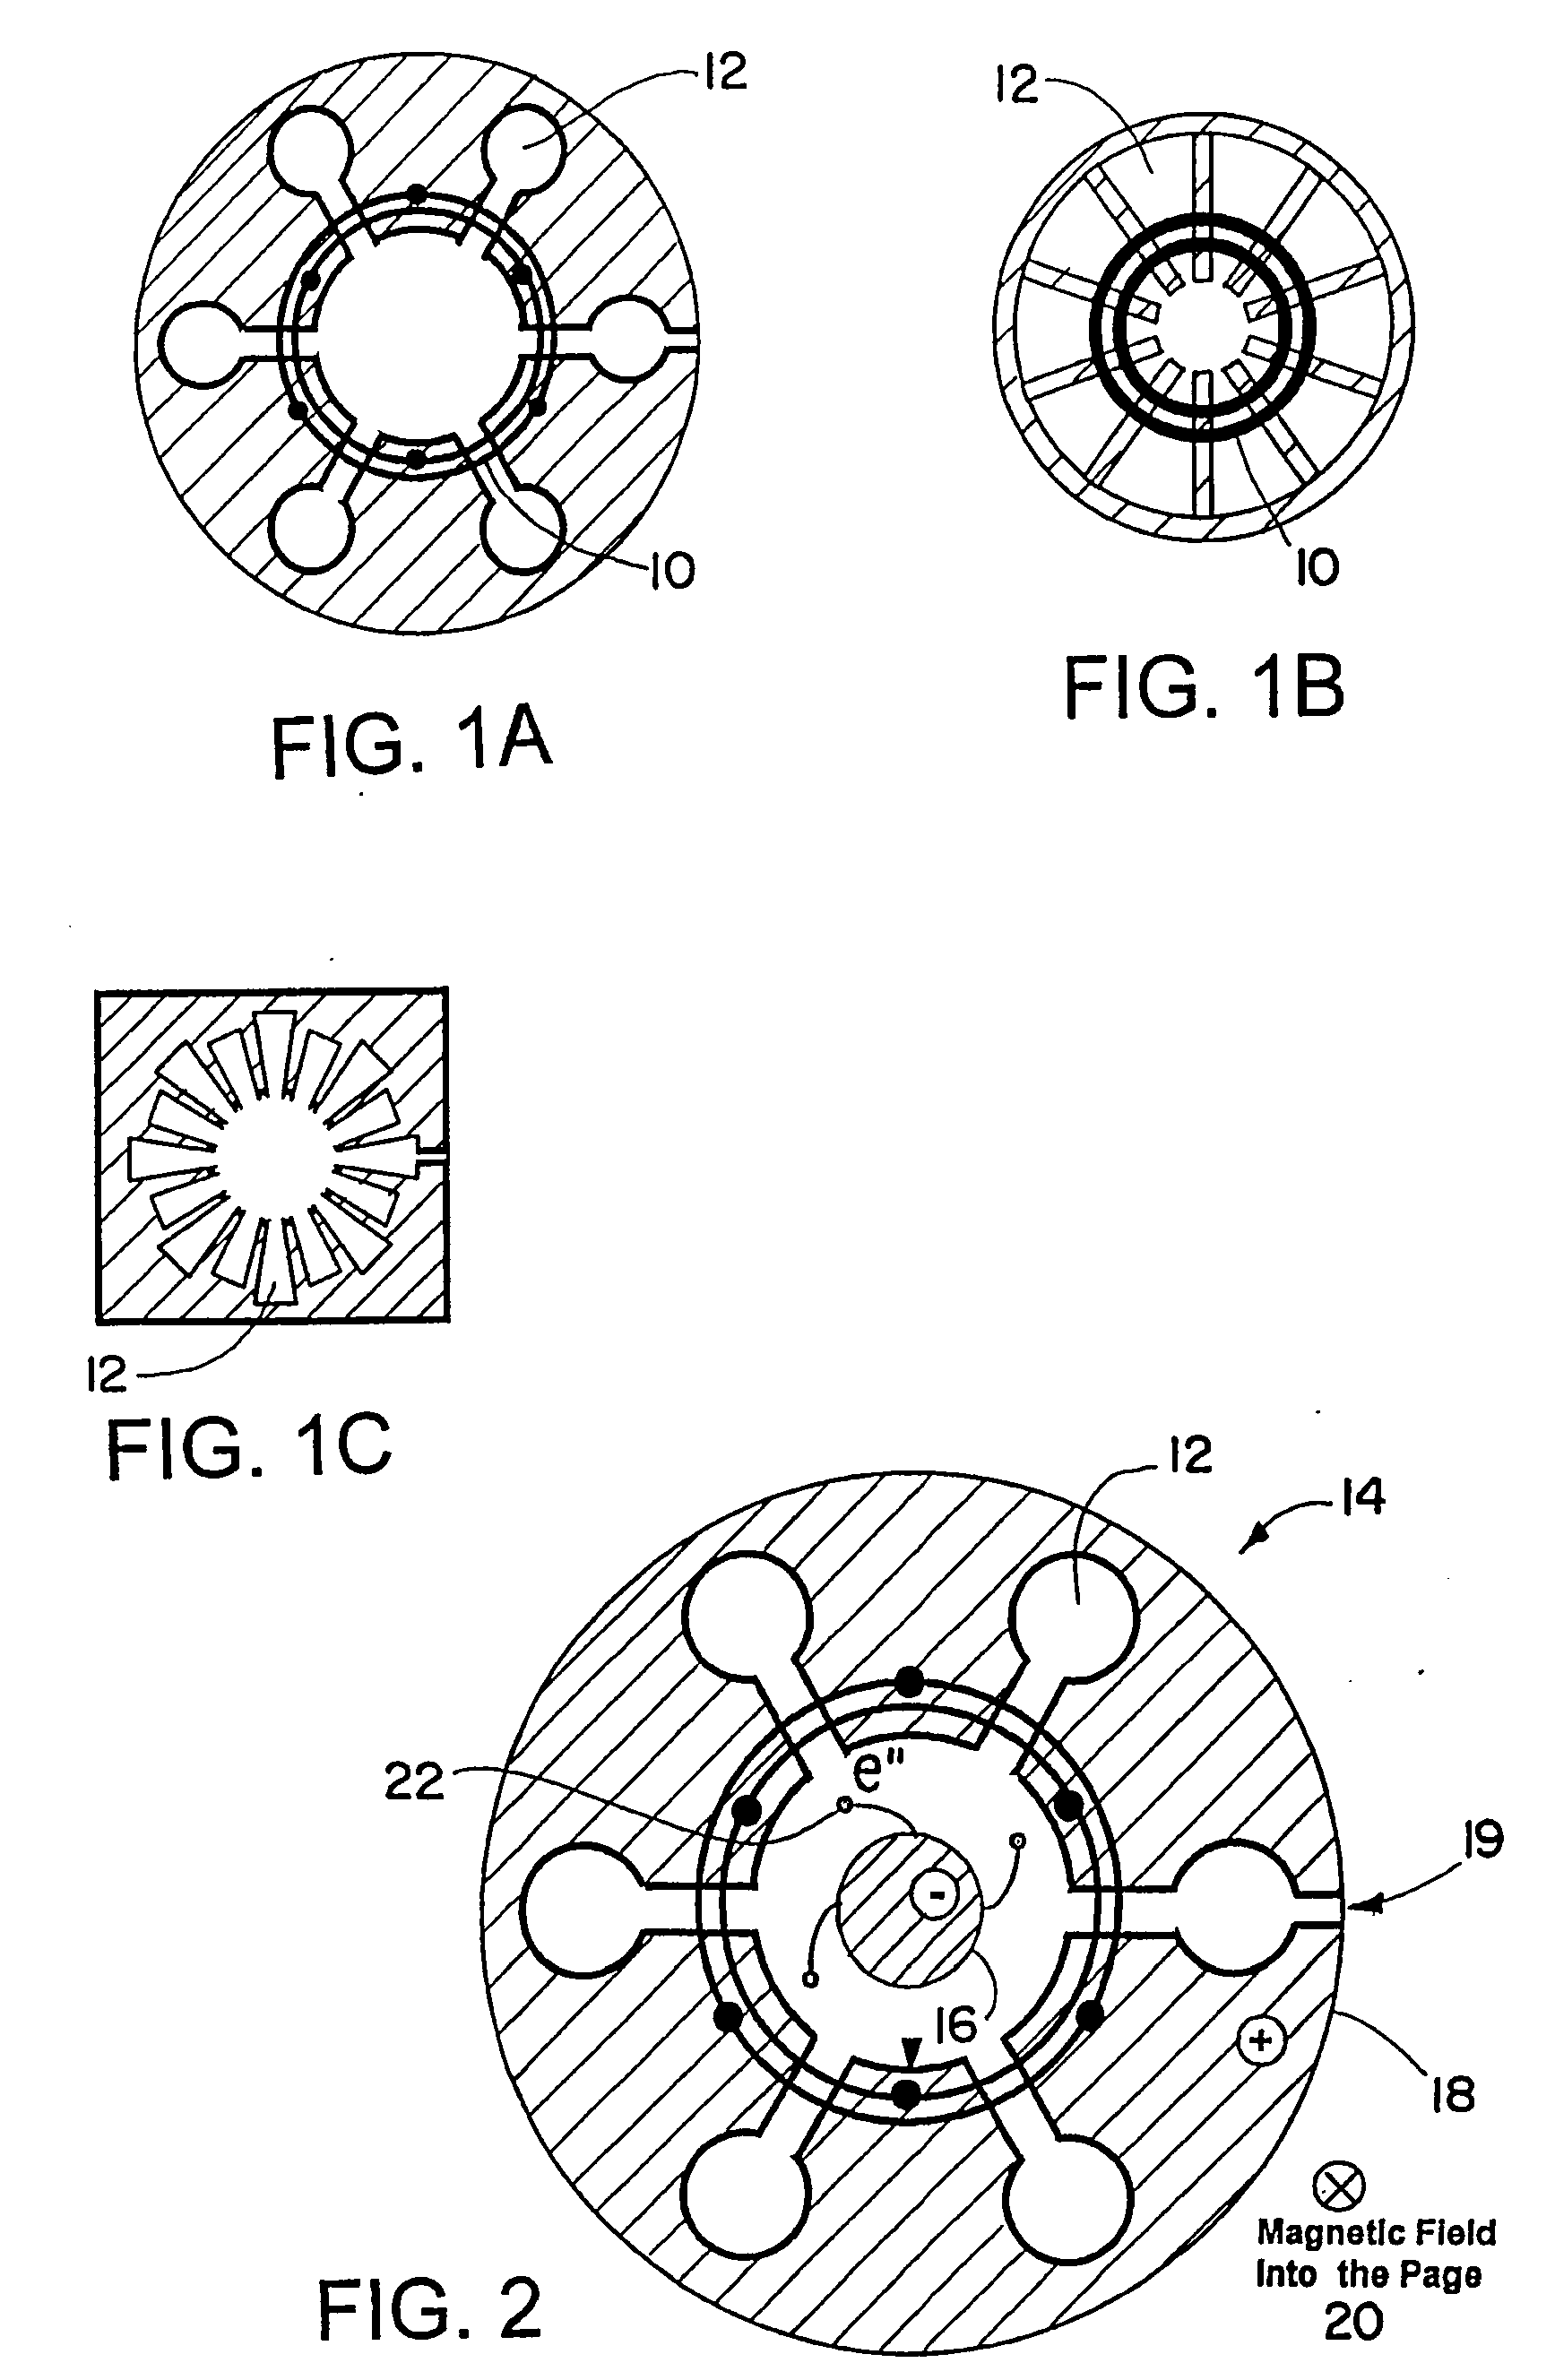 Optical magnetron for high efficiency production of optical radiation and related methods of use